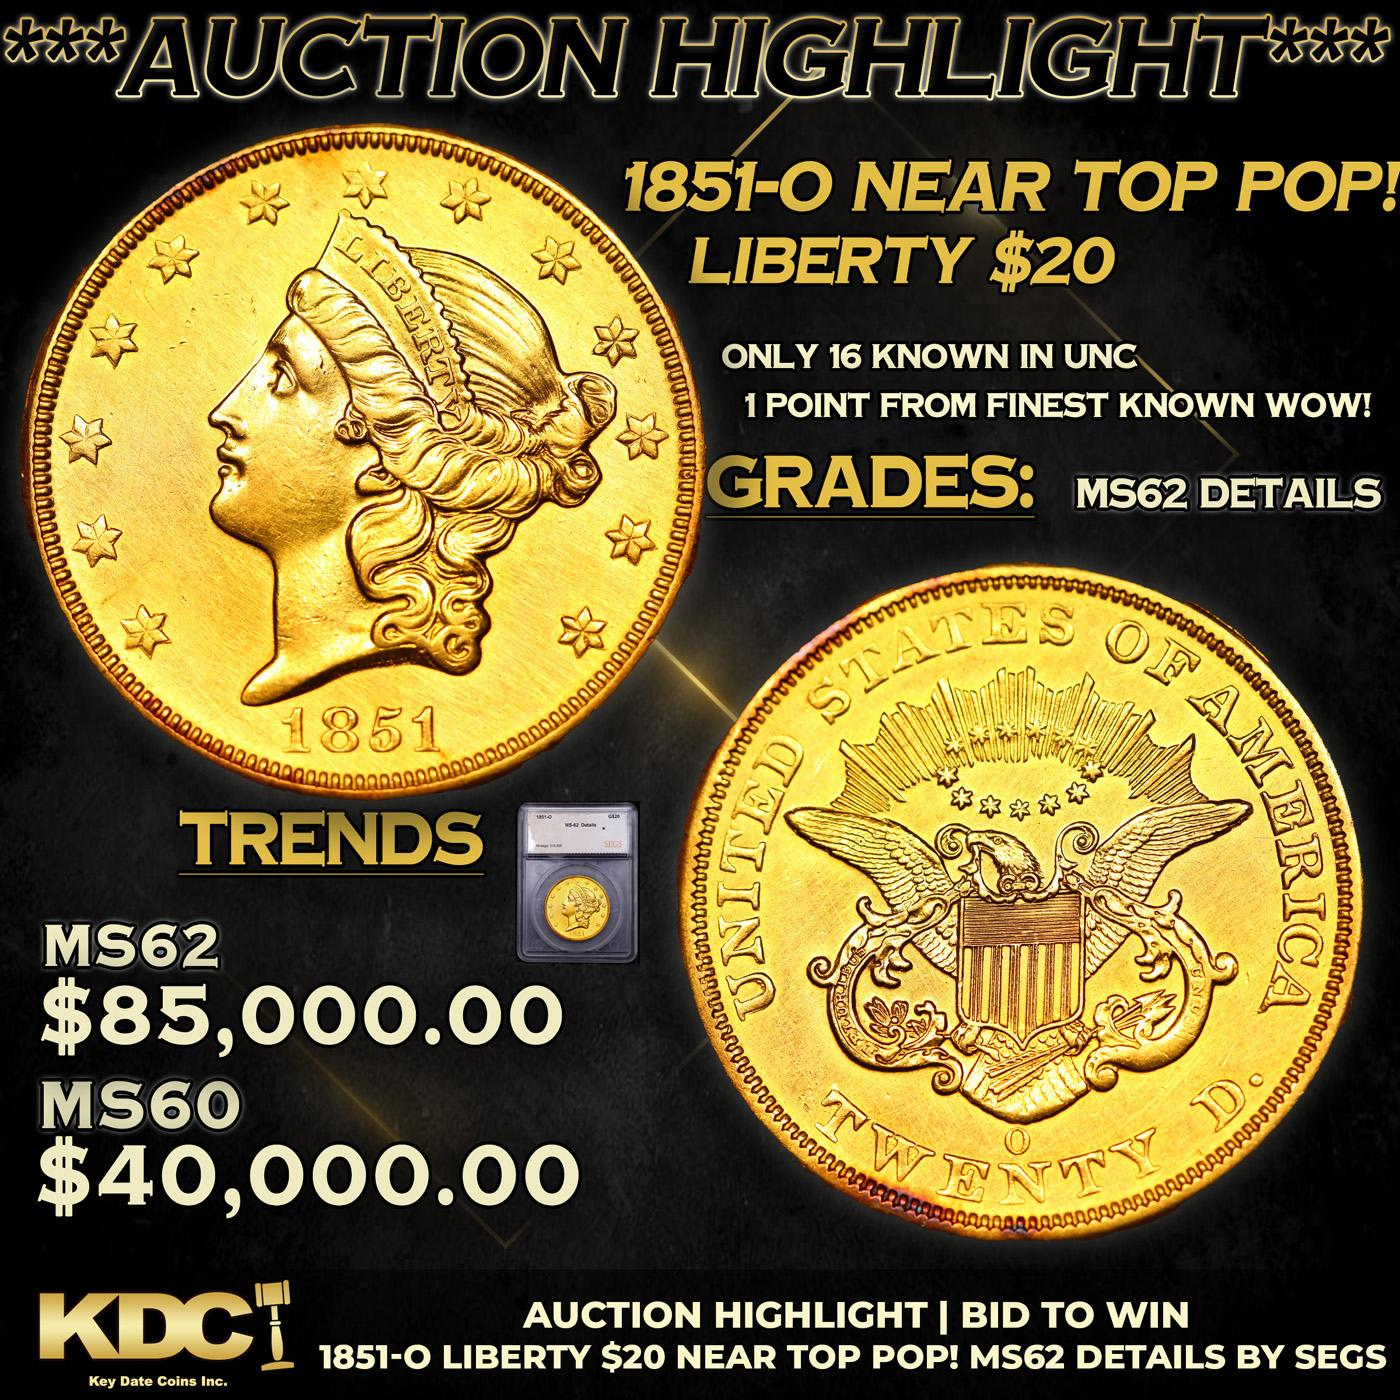 ***Auction Highlight*** 1851-o Gold Liberty Double Eagle Near Top Pop! $20 Graded ms62 details By SE